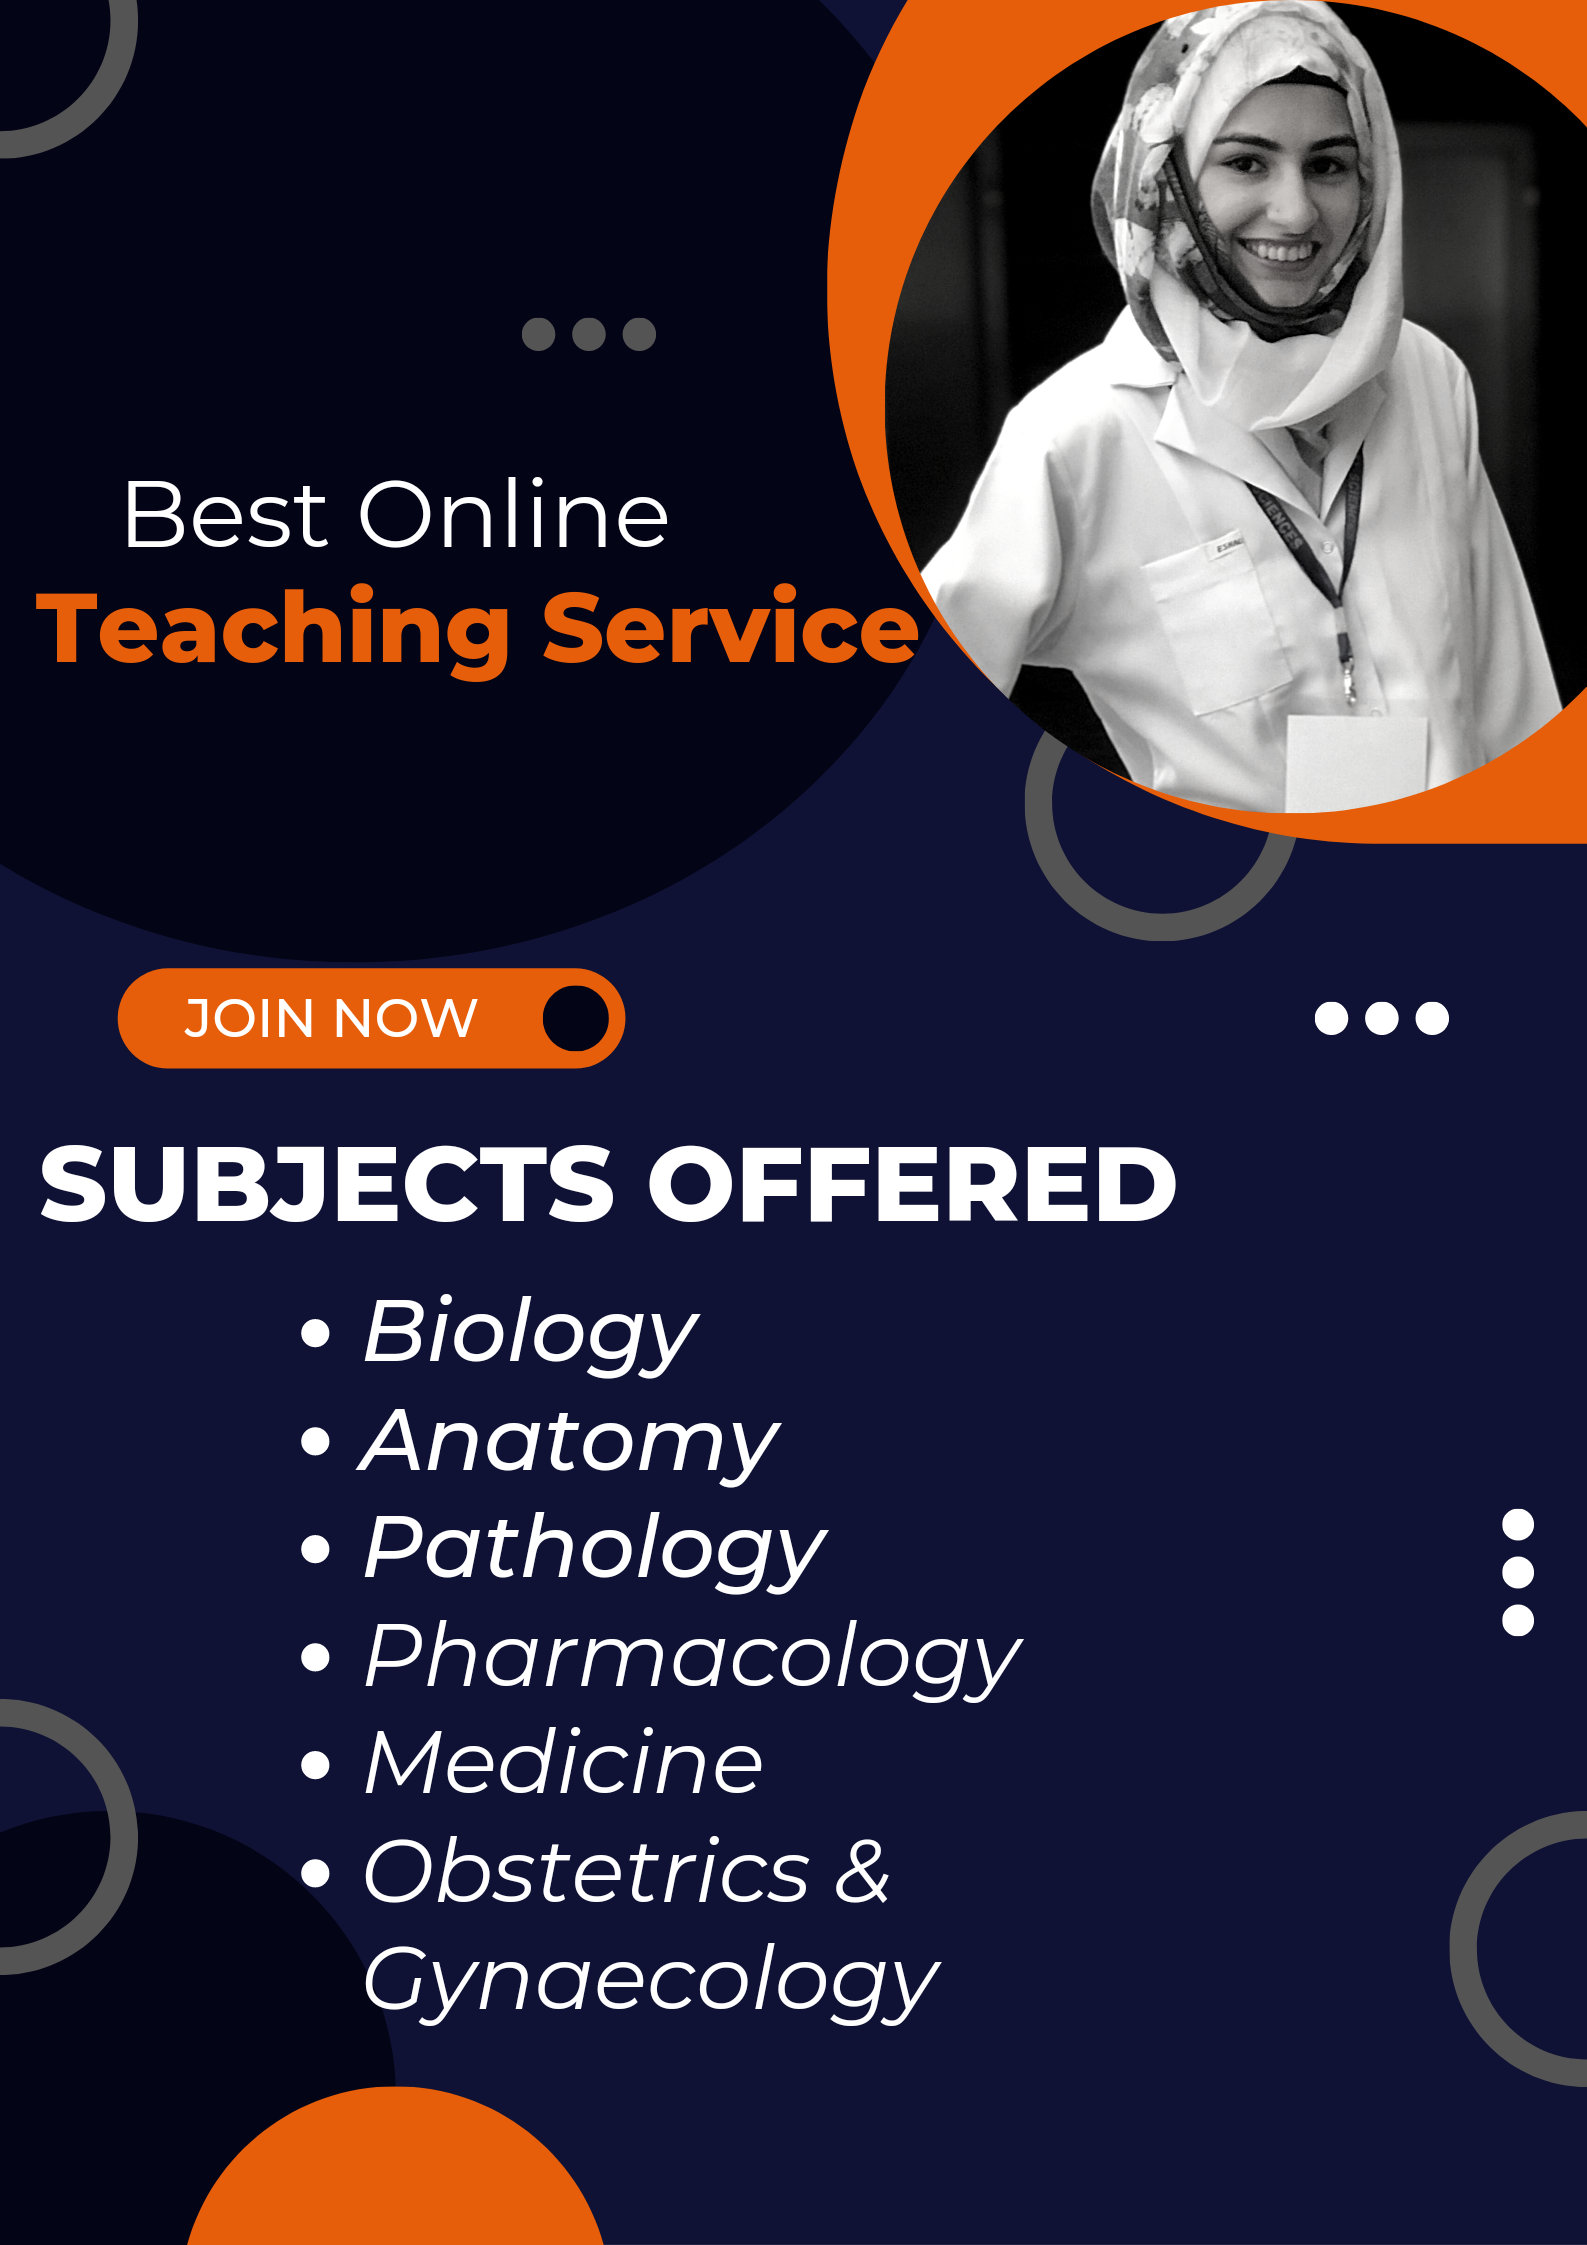 43155I will teach Biology & related subjects online